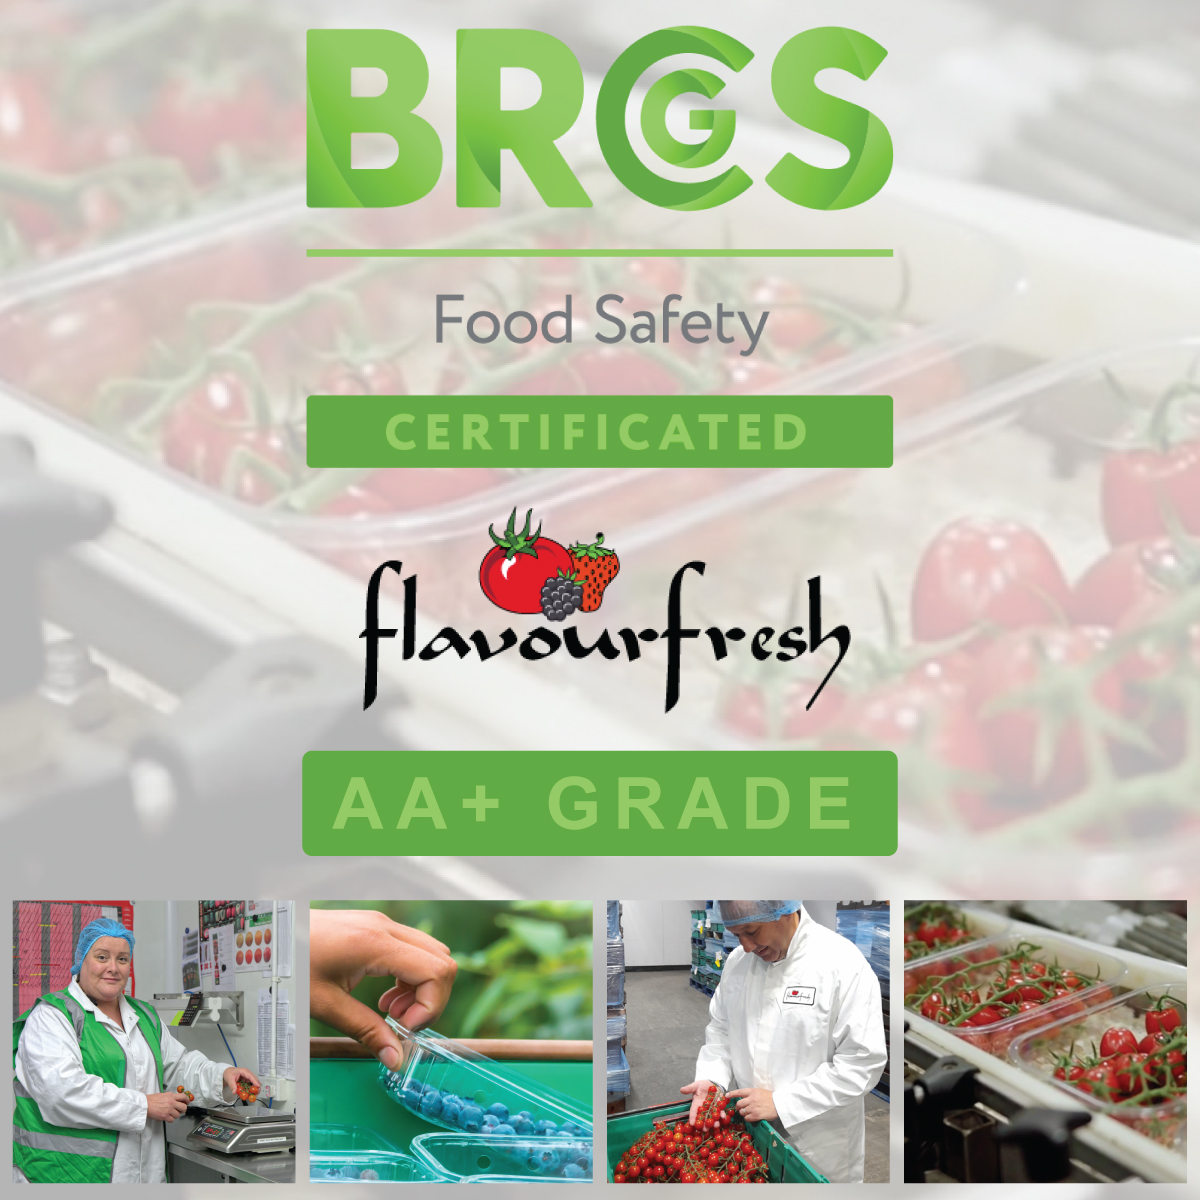 Flavourfresh achieve AA+ BRCGS Food Safety Certification